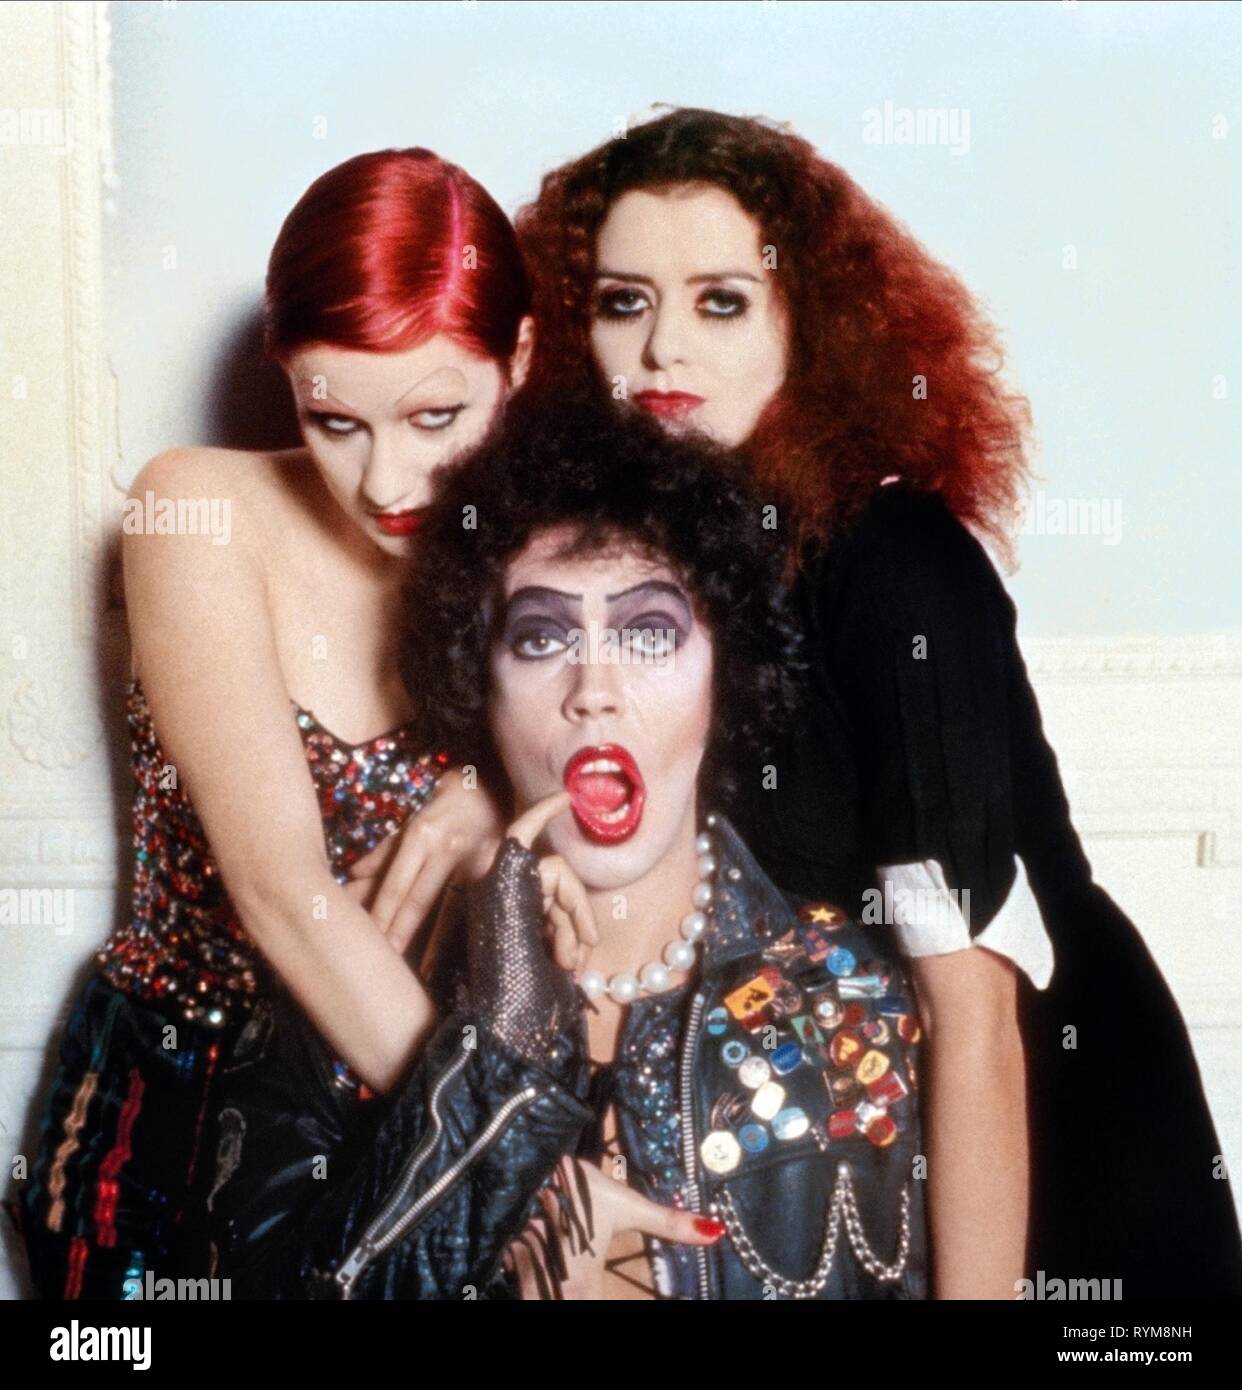 CAMPBELL,QUINN,CURRY, THE ROCKY HORROR PICTURE SHOW, 1975 Stock Photo